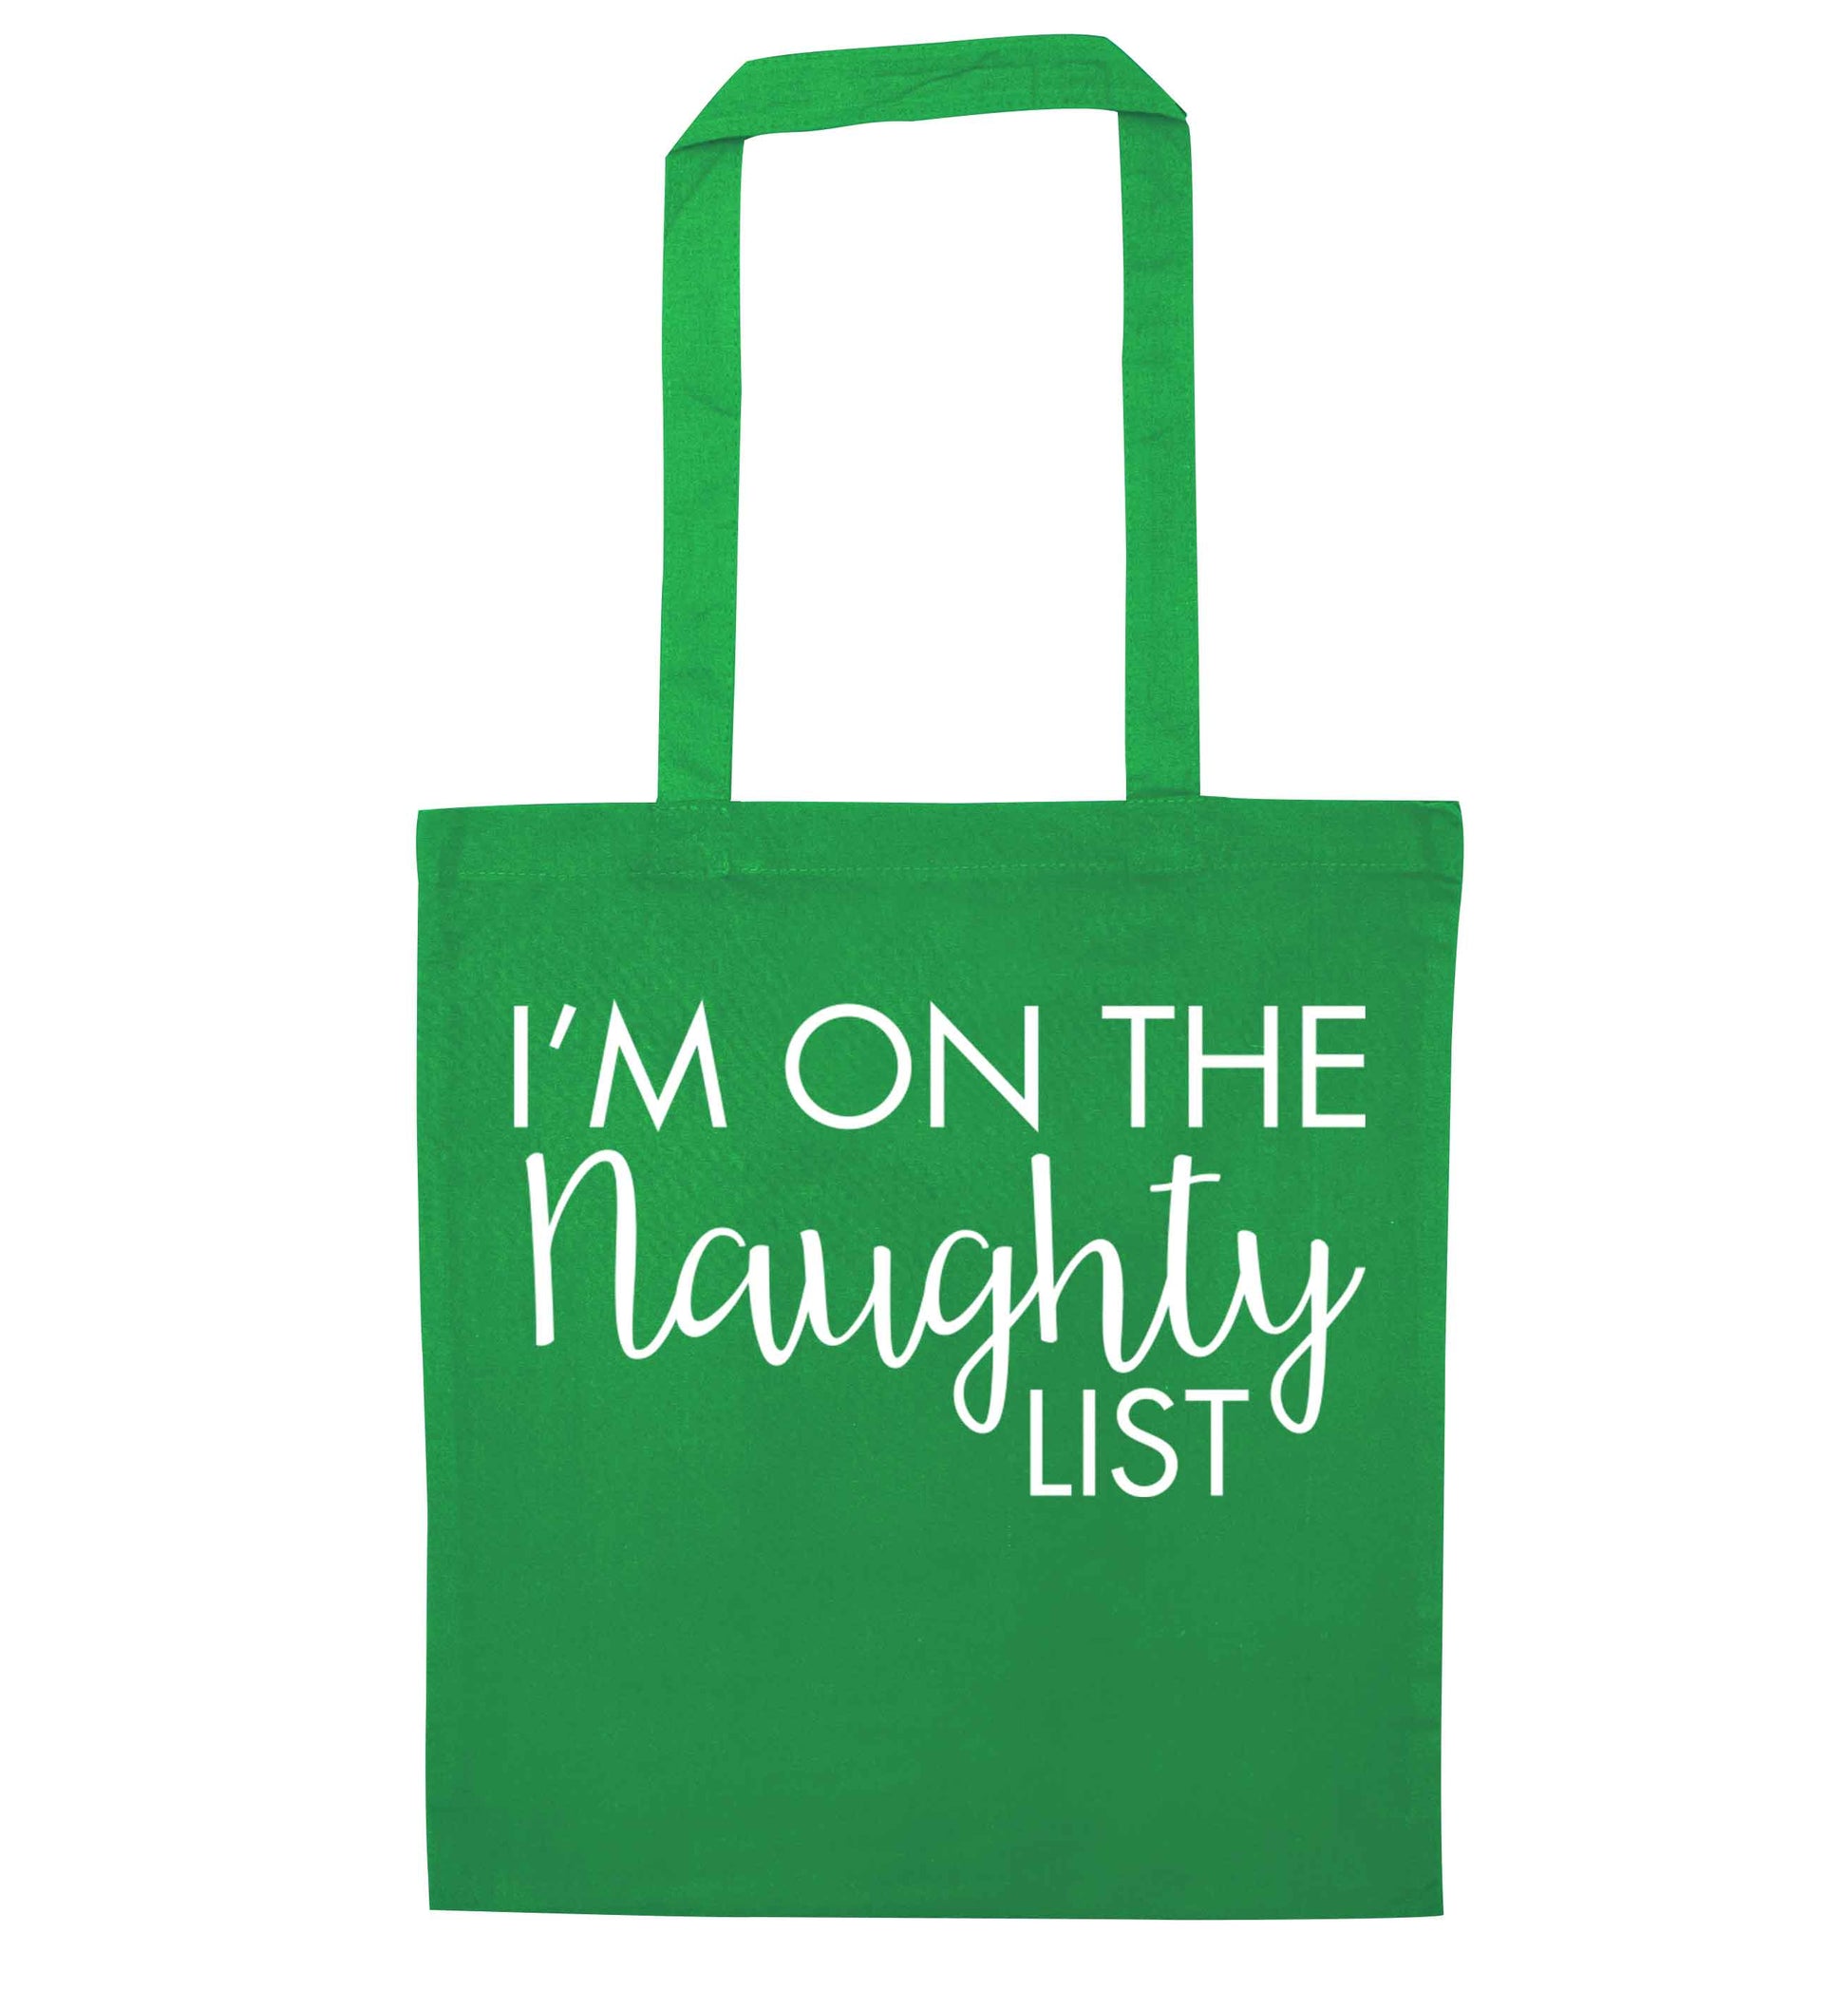 I'm on the naughty list green tote bag